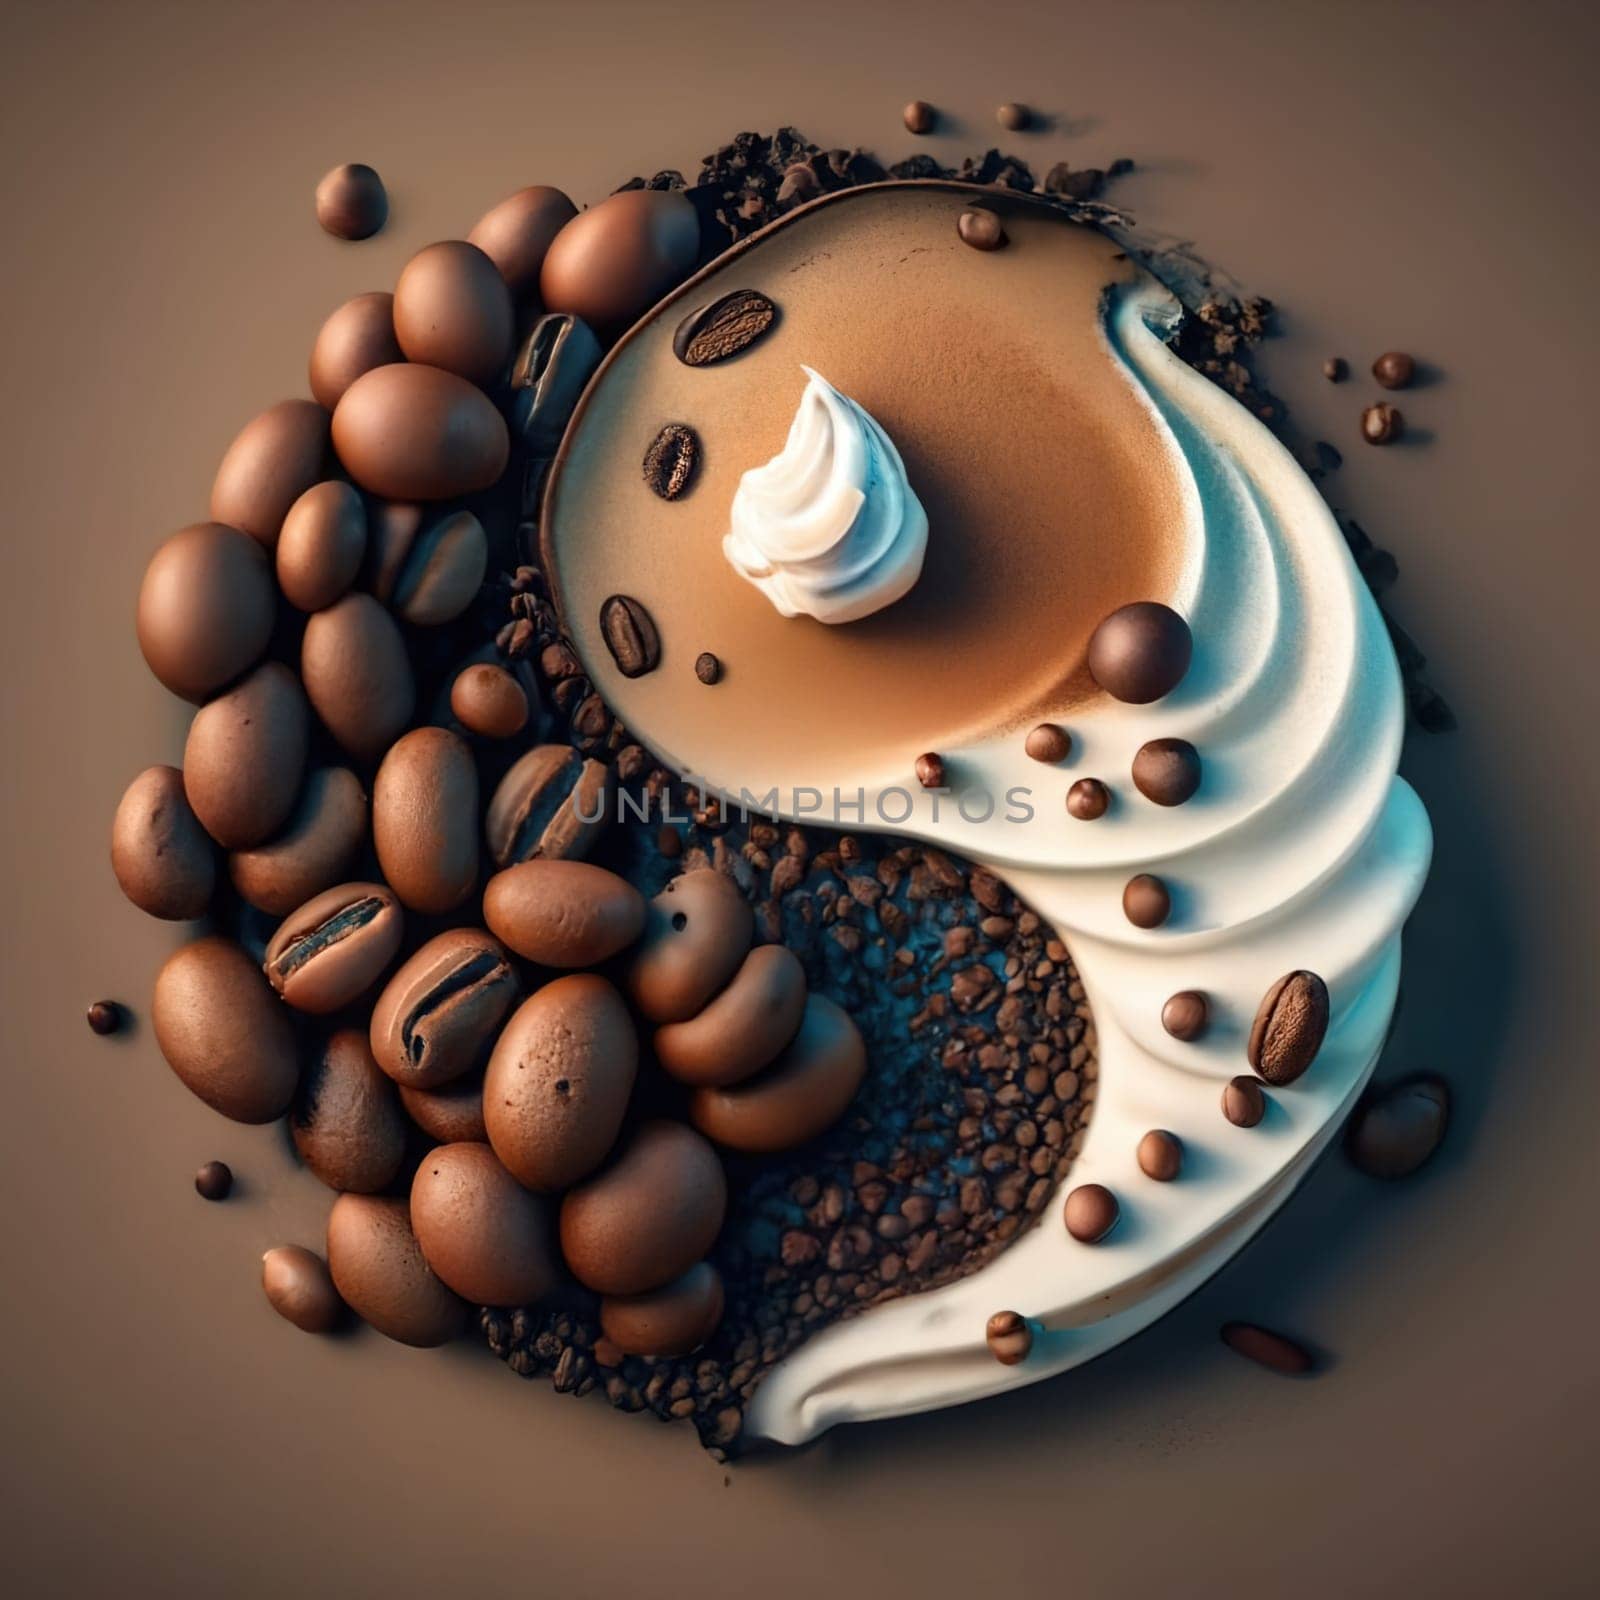 Yin-Yang Coffee Art: Symbol Created with Black Coffee and Whipped Cream - Creative Concept in Food Art by igor010